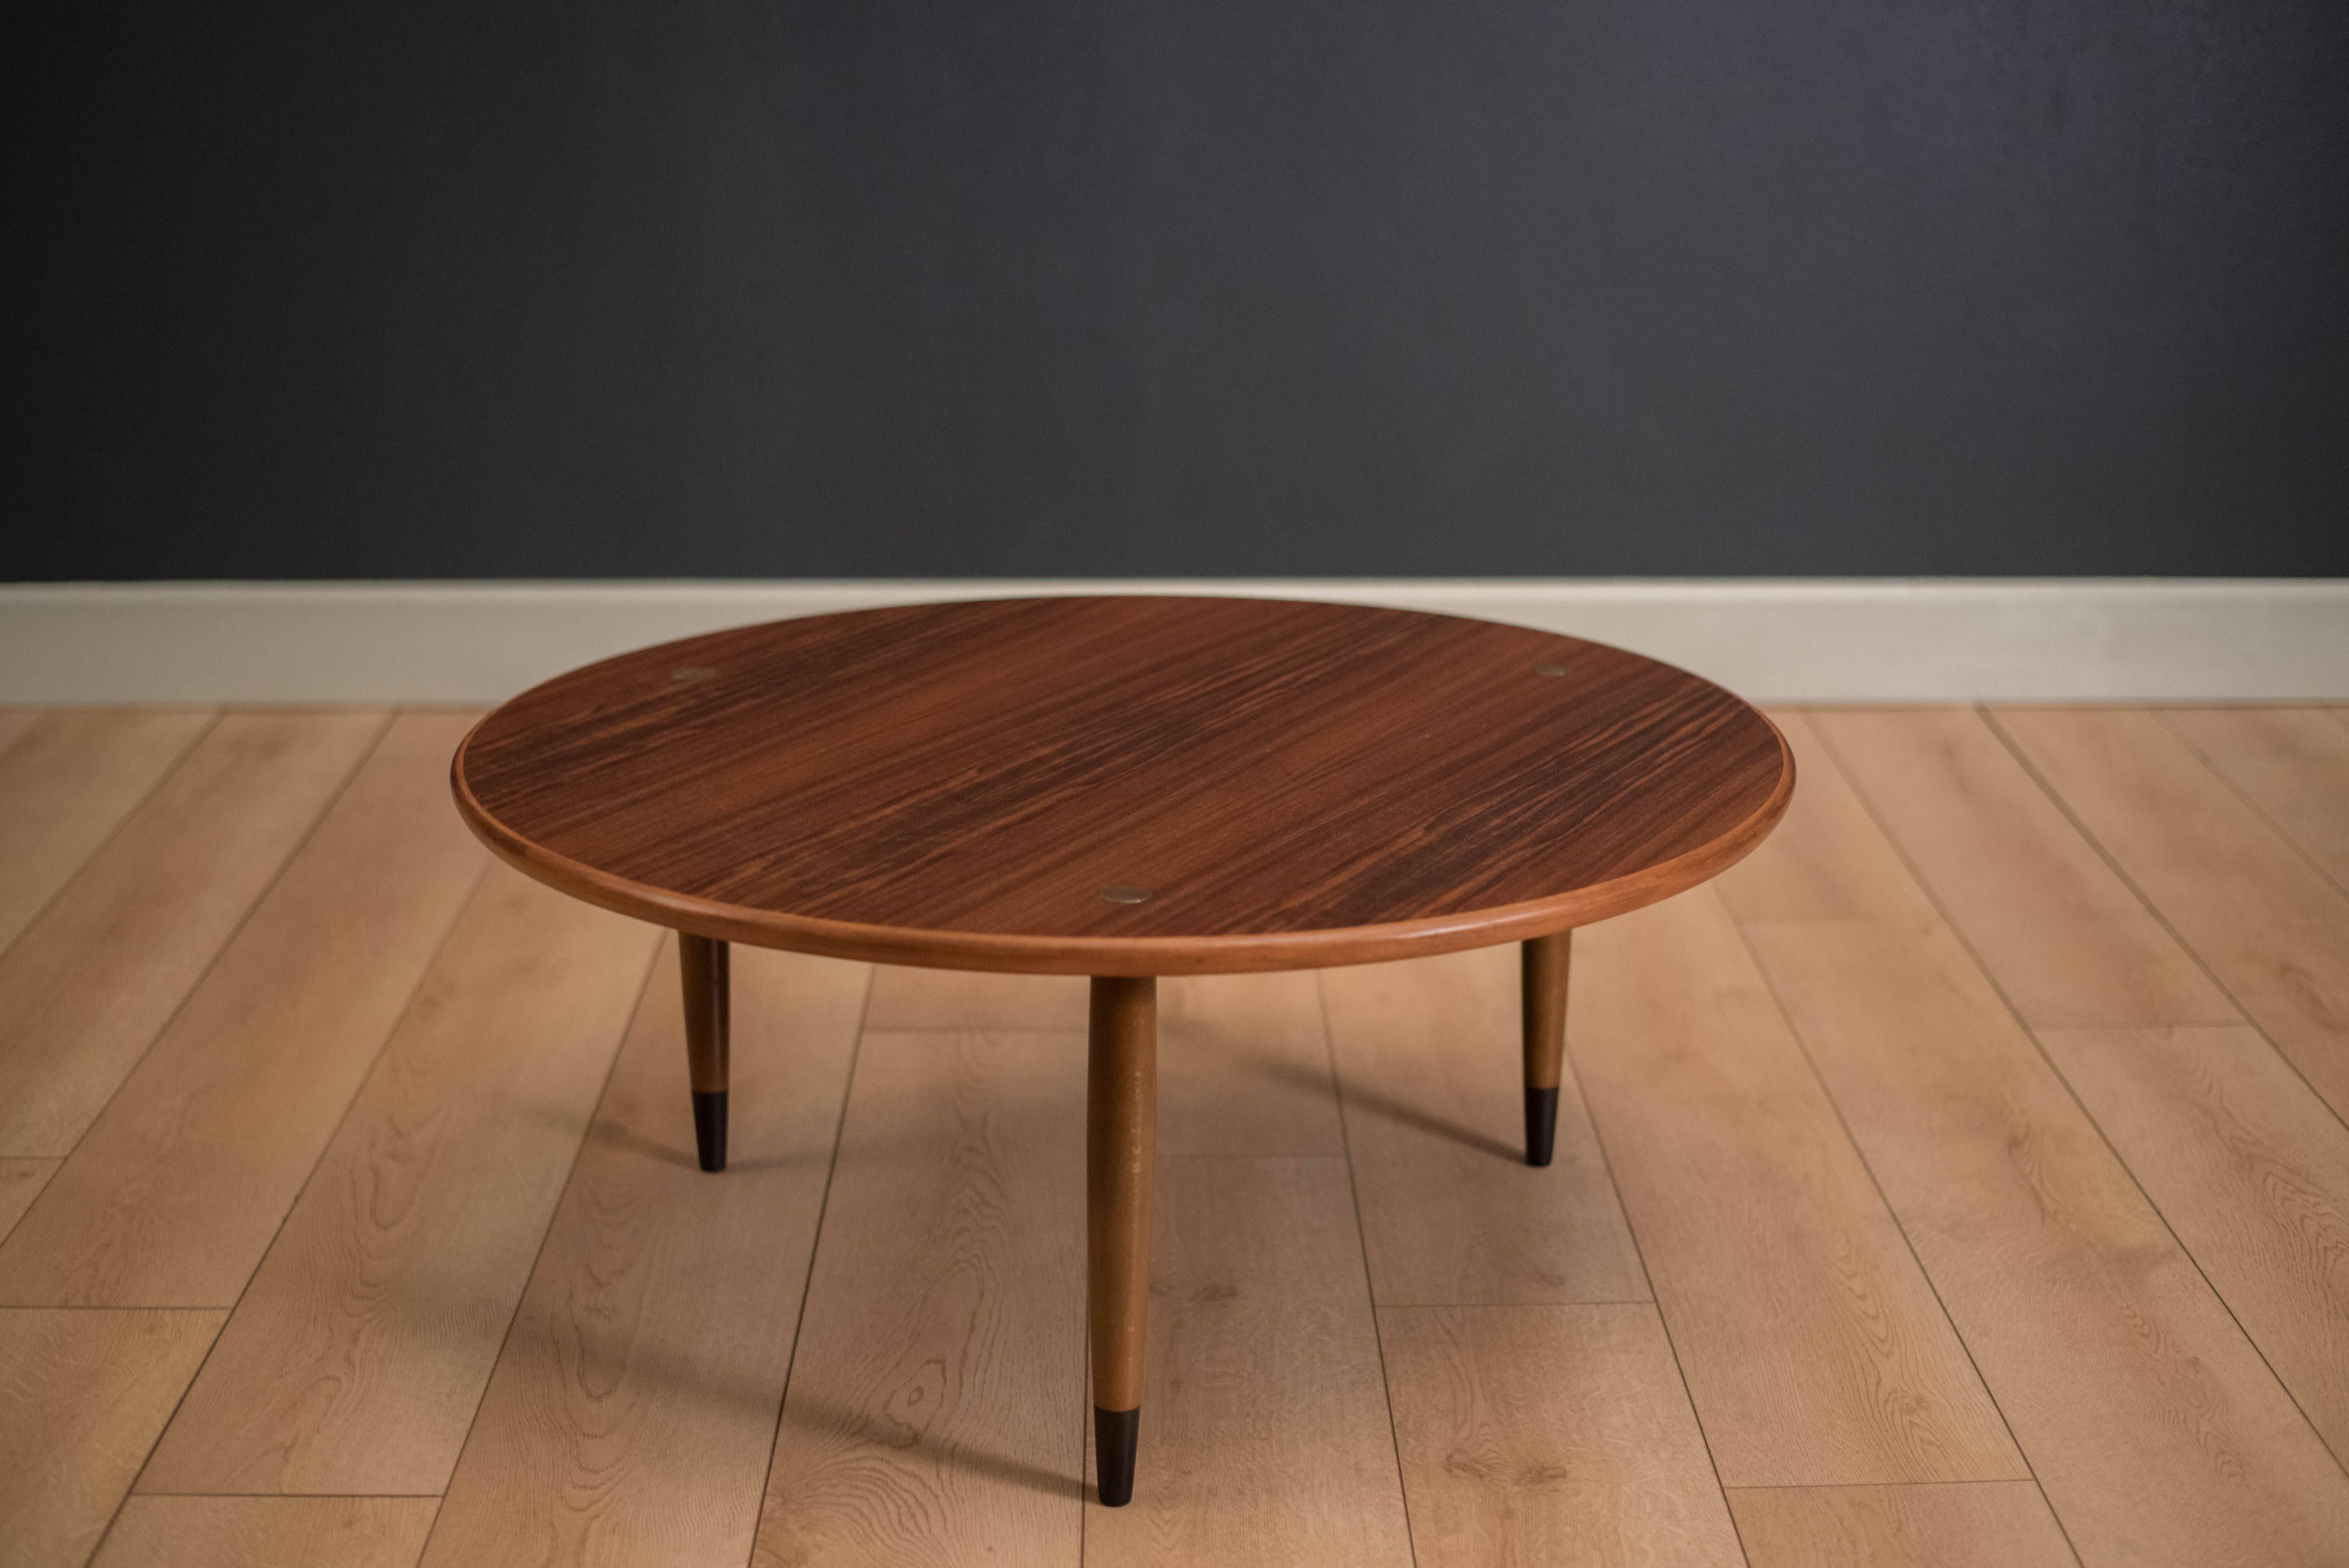 Mid-Century Modern round coffee table in walnut by DUX of Sweden. This piece features brass accents and a solid walnut edge banding.